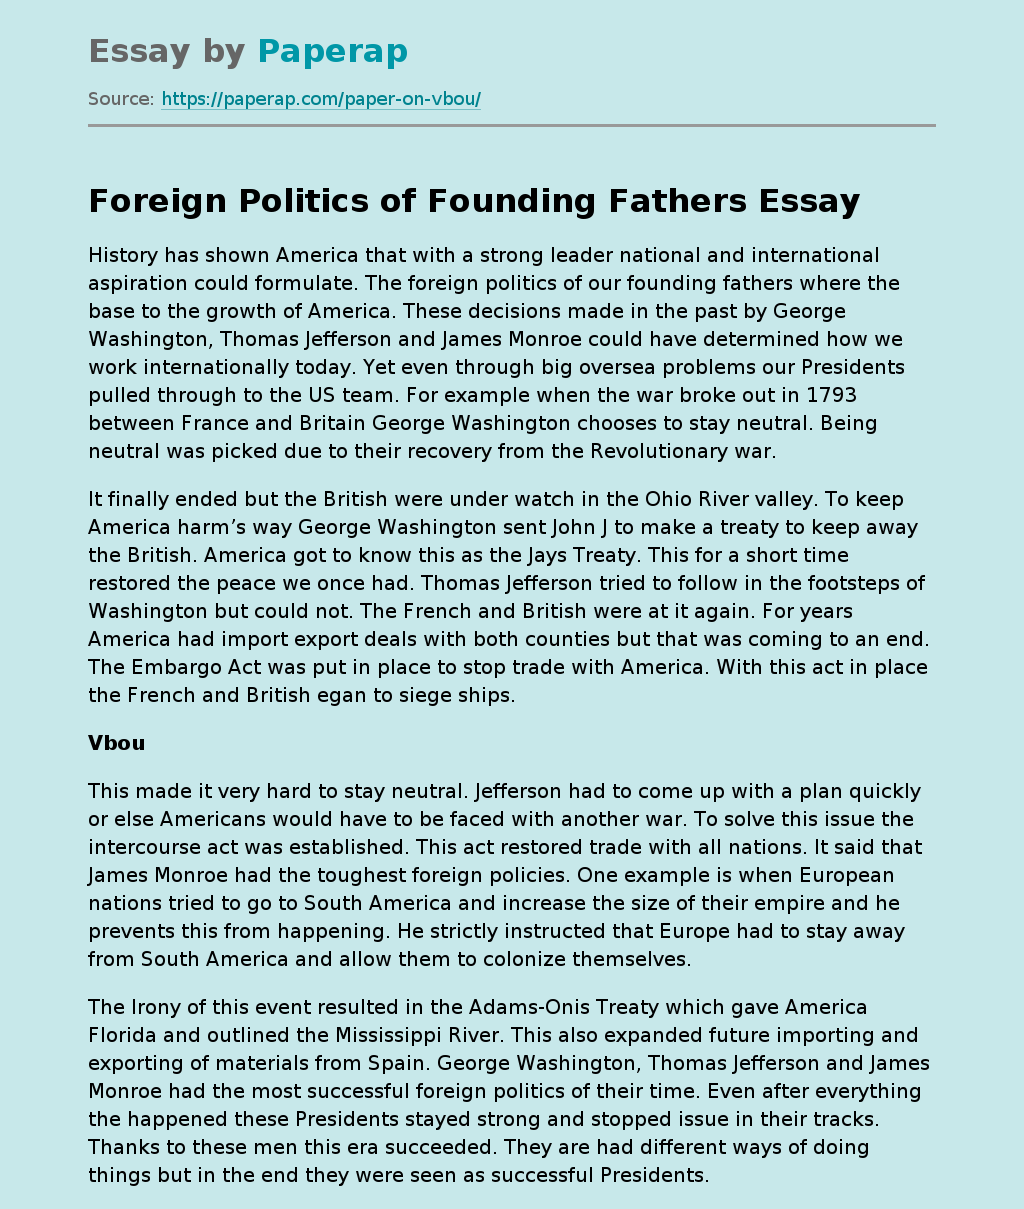 Foreign Politics of Founding Fathers